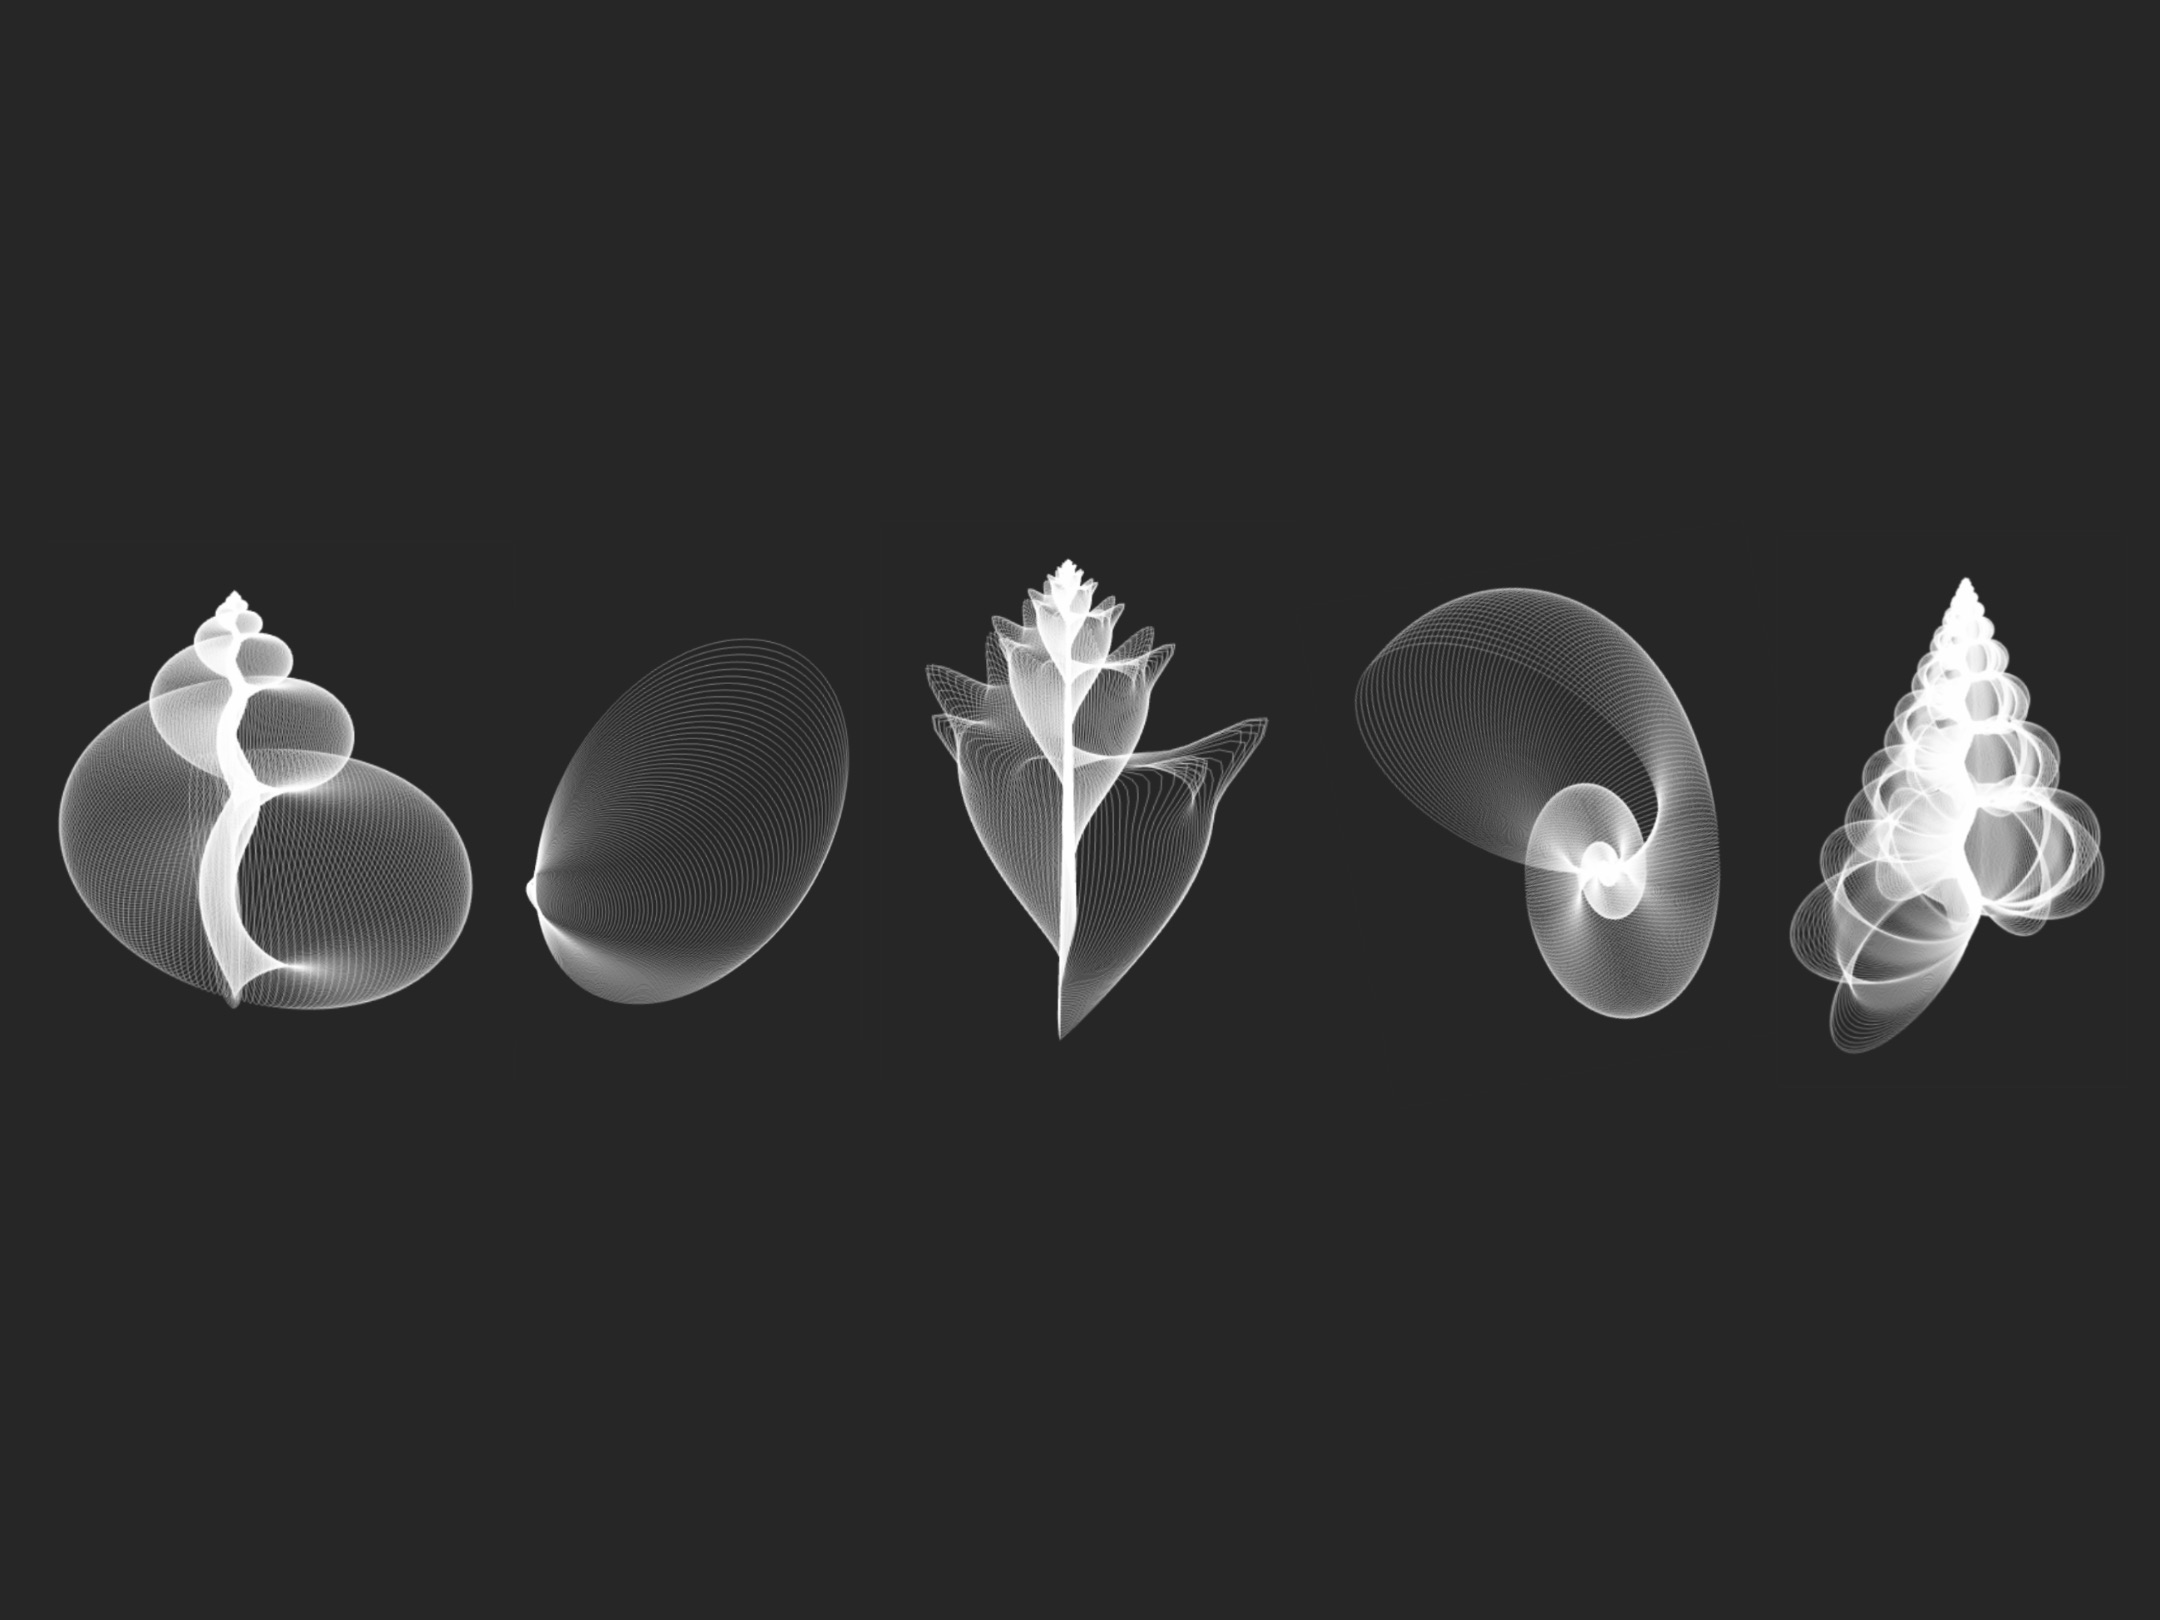 An x-ray style image of 5 different kinds of seashells: snail, clam, conch, nautilus, and wentletrap